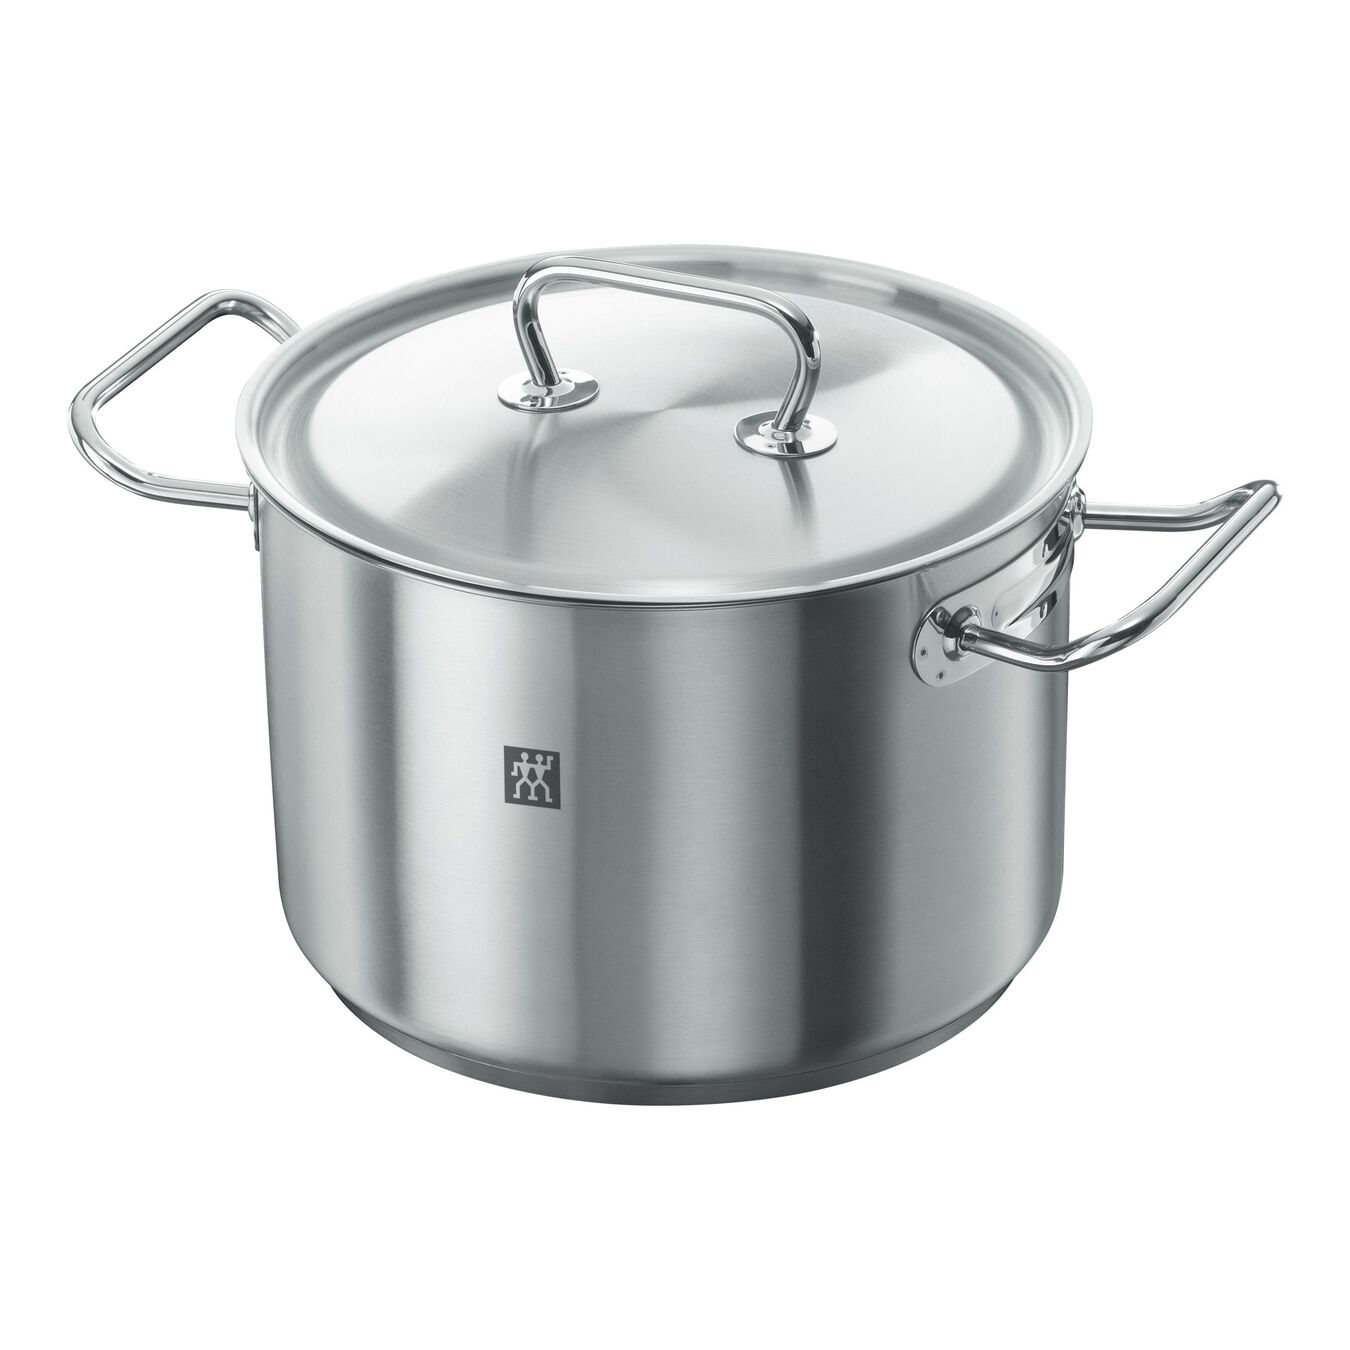 24 cm 18/10 Stainless Steel Stock pot,,large 1